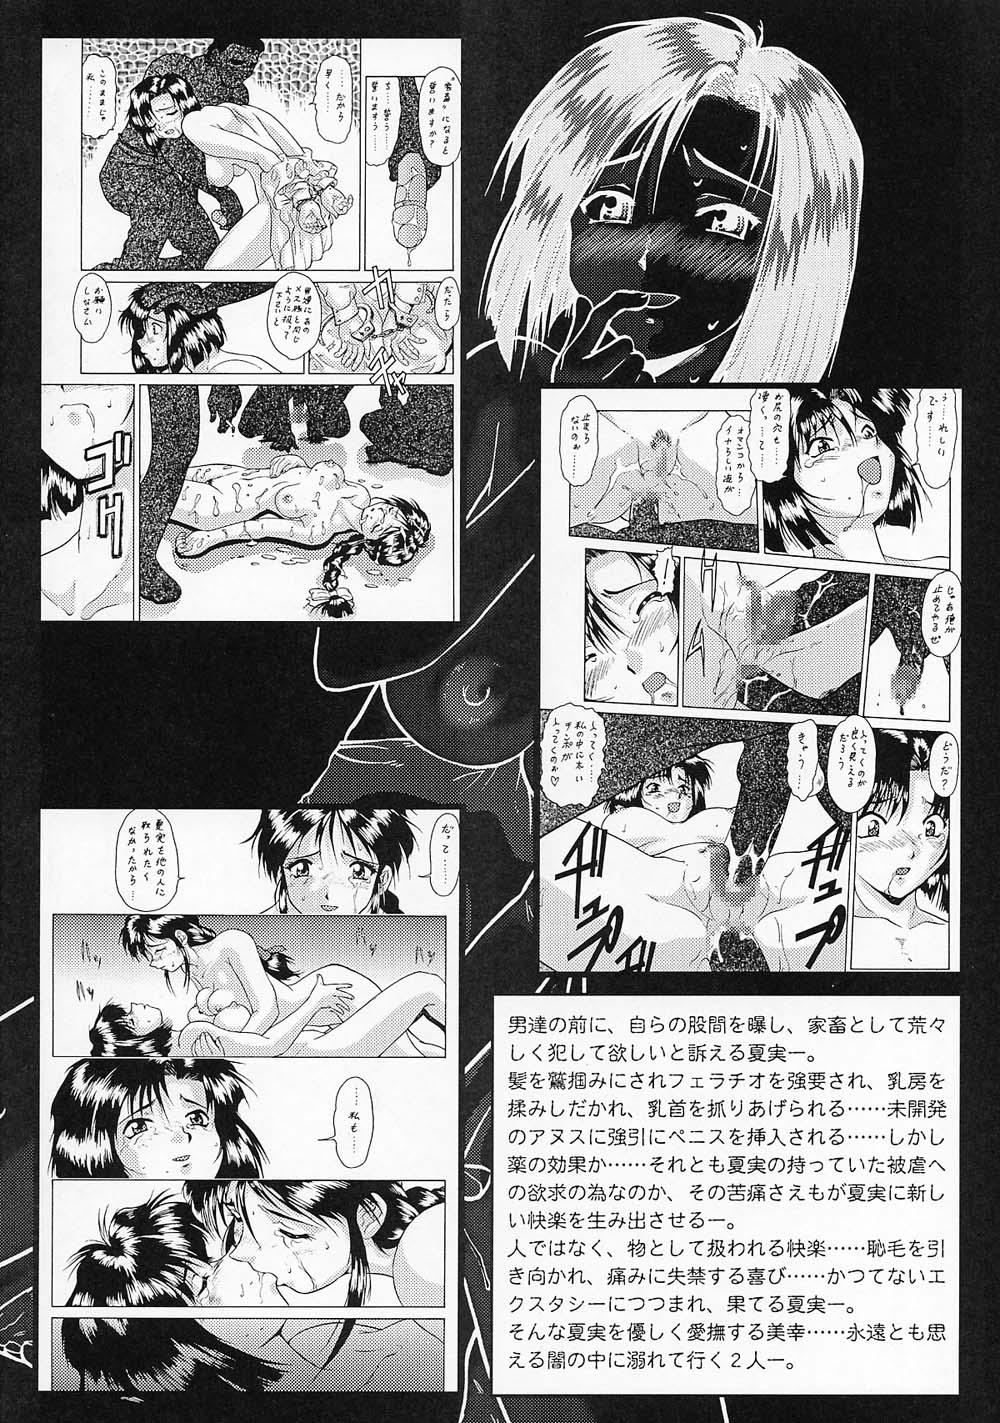 Masturbating Taiho Shichauzo The Doujin Vol. 3 - Youre under arrest Best Blow Job - Page 8